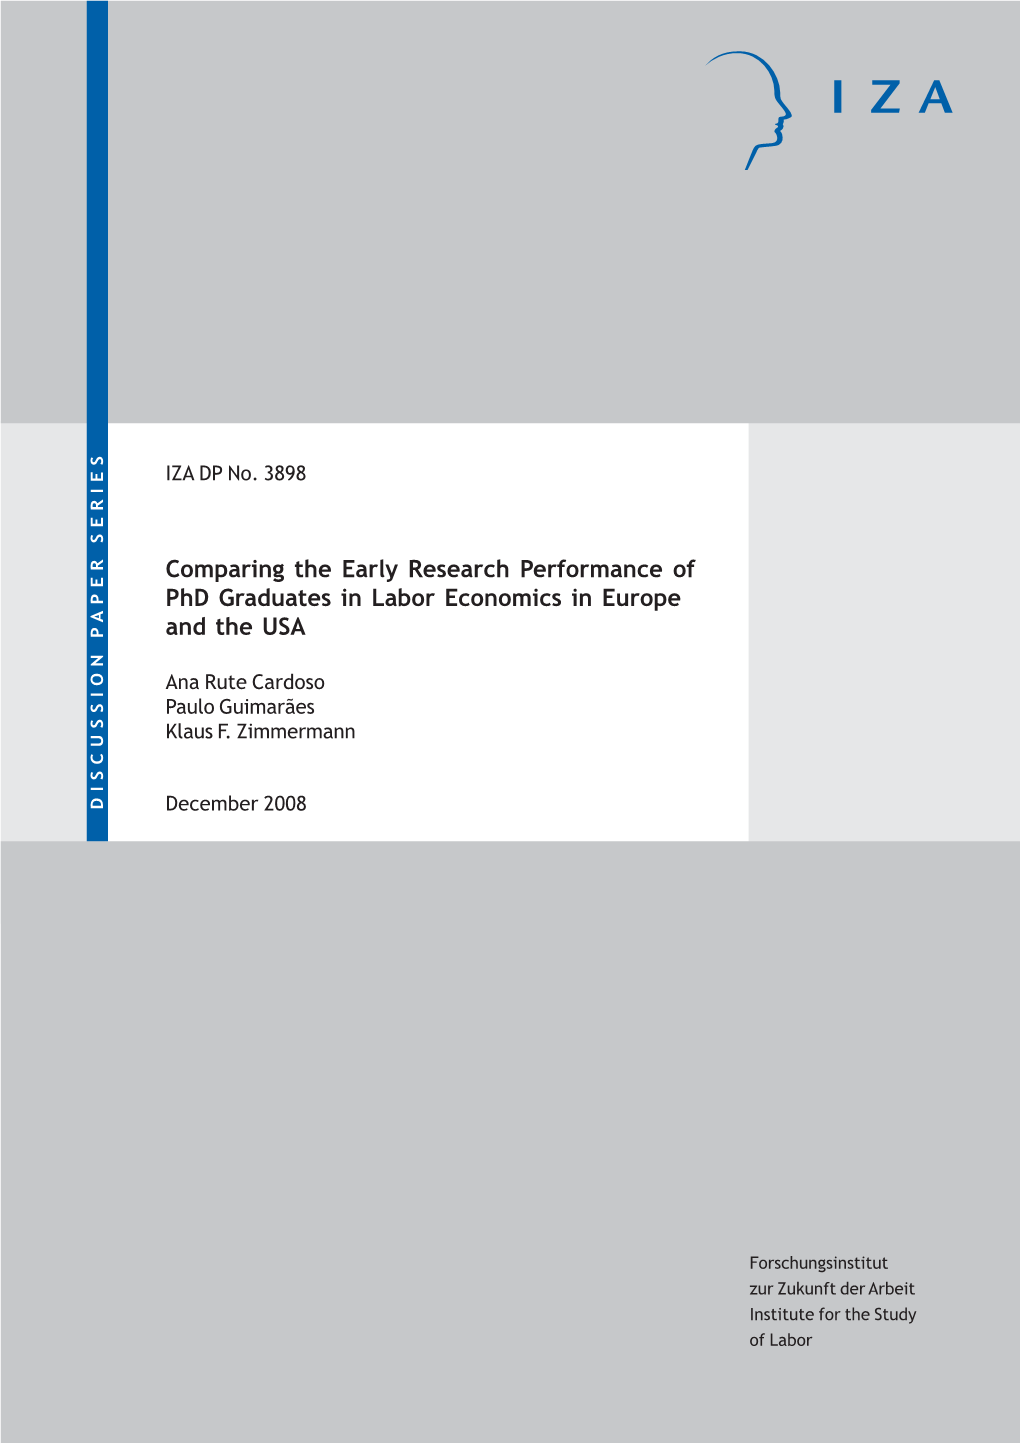 Comparing the Early Research Performance of Phd Graduates in Labor Economics in Europe and the USA